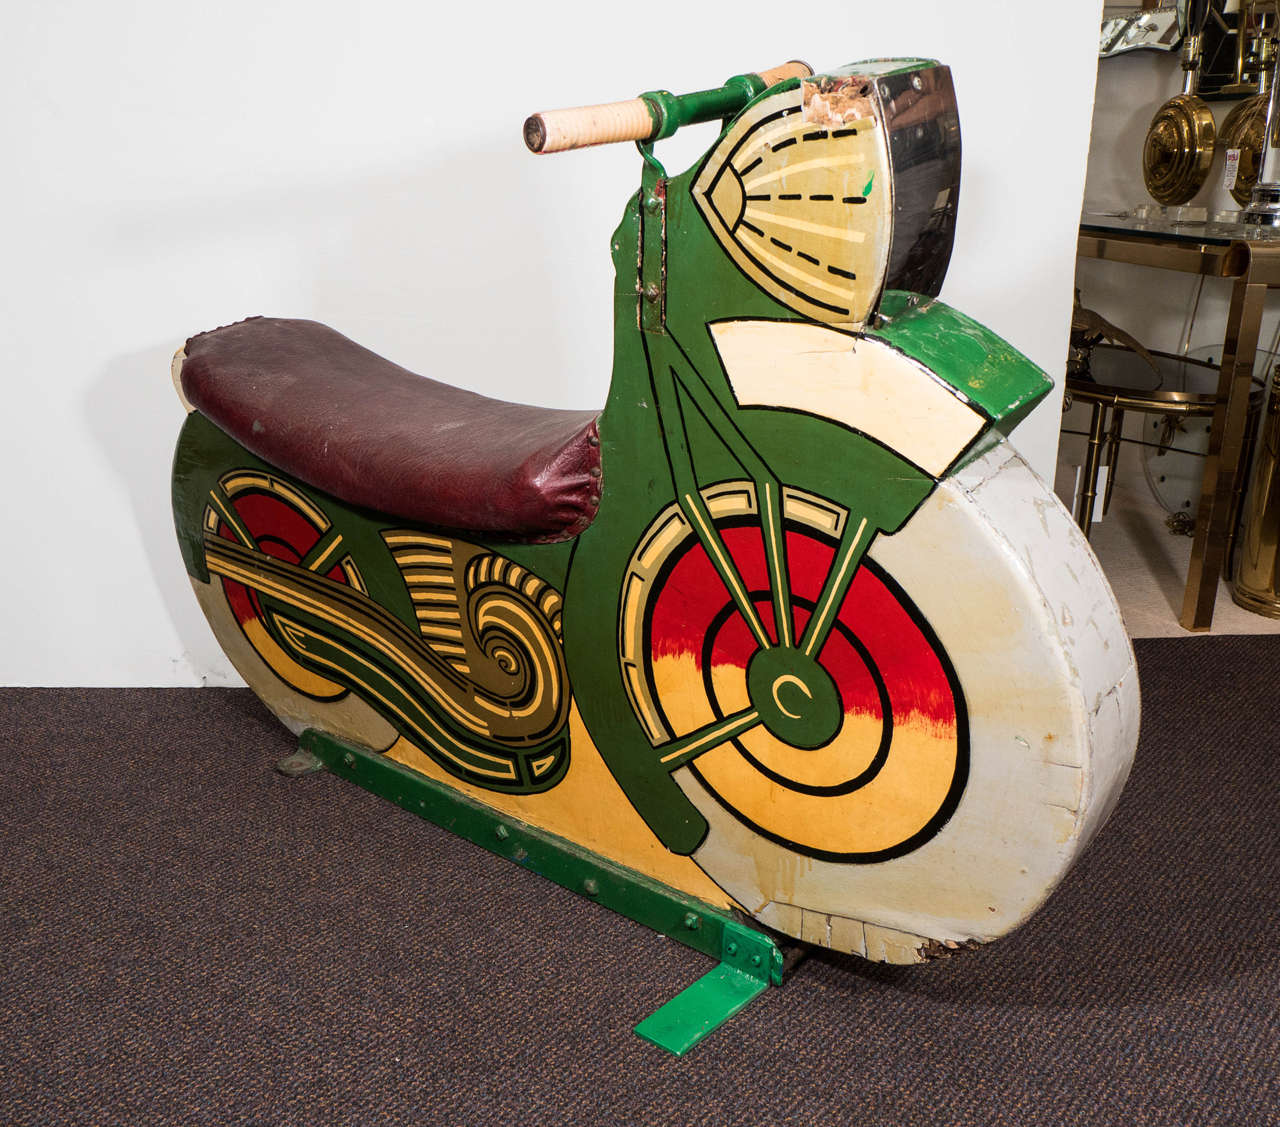 A 1930s wooden motorcycle sculpture for an amusement park, hand-painted with leather seat, standing on original, enameled green iron base. Chrome accent at headlight, great colors and graphics. May have been used for children's ride or carnival